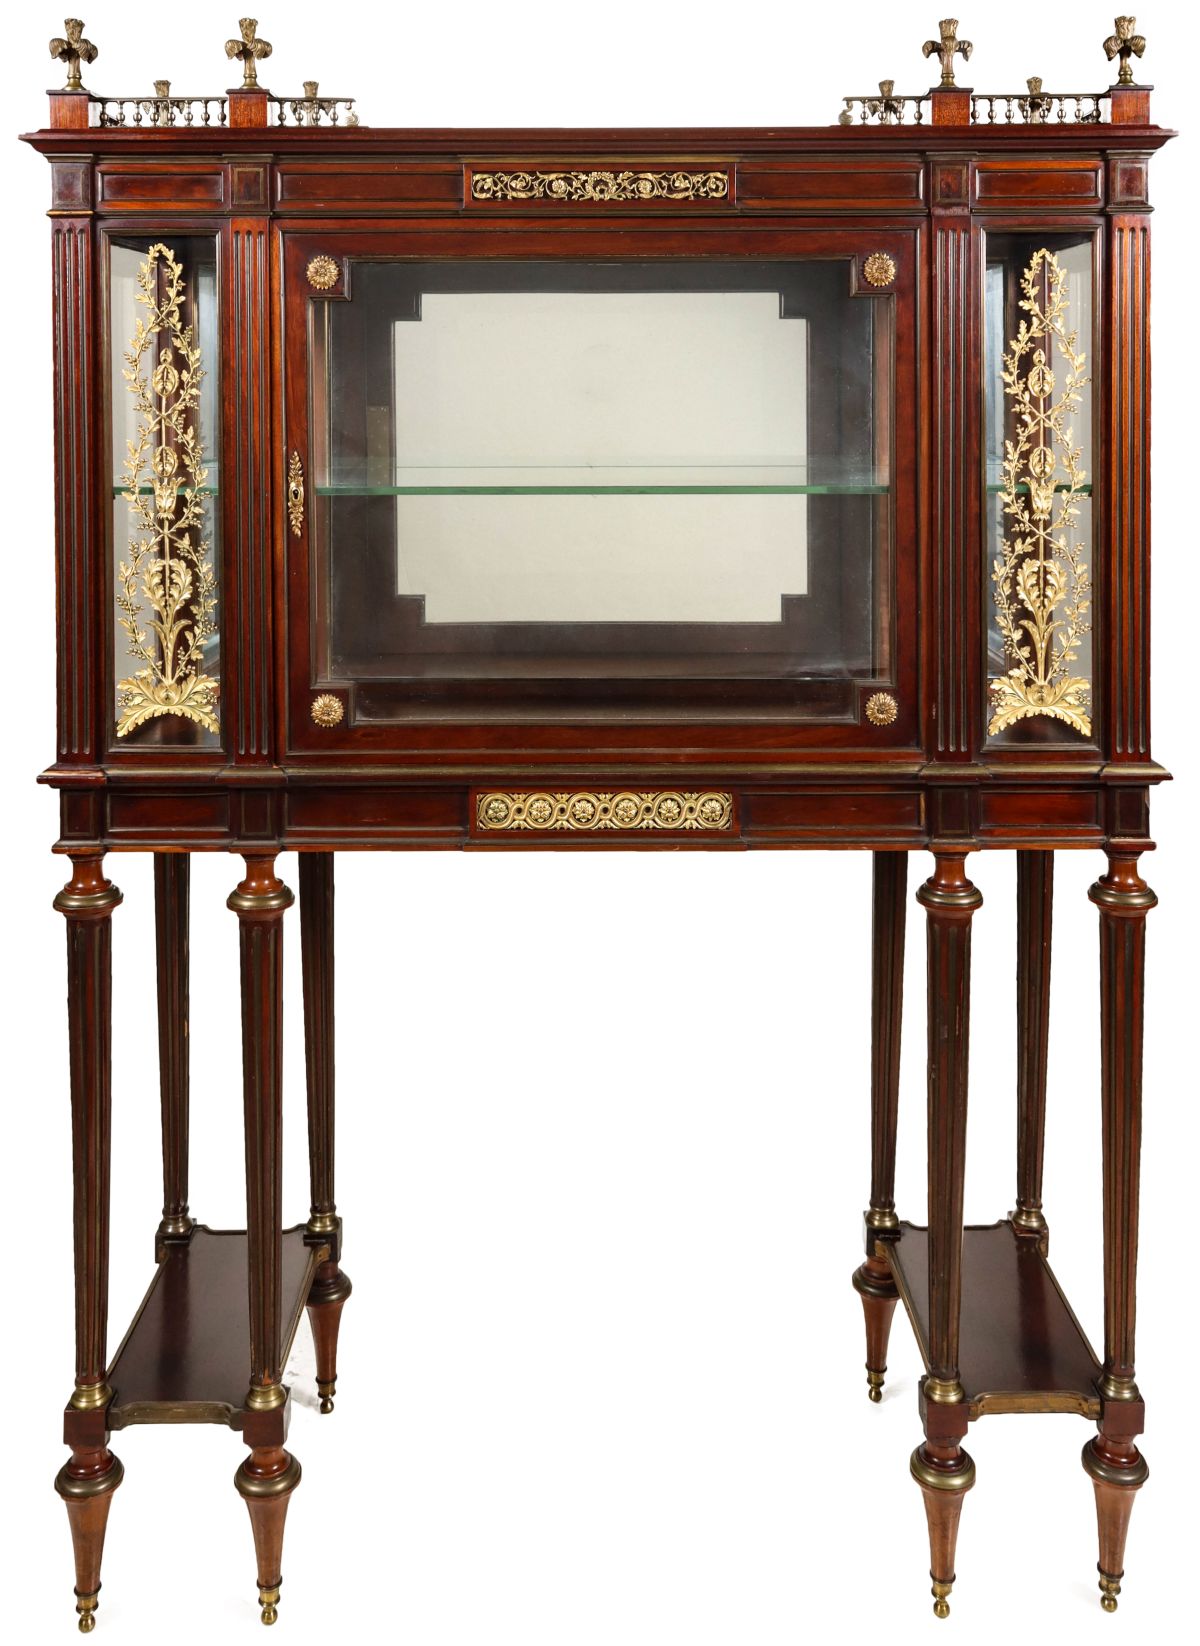 A HIGH QUALITY BRONZE MOUNTED AND INLAID FRENCH VITRINE